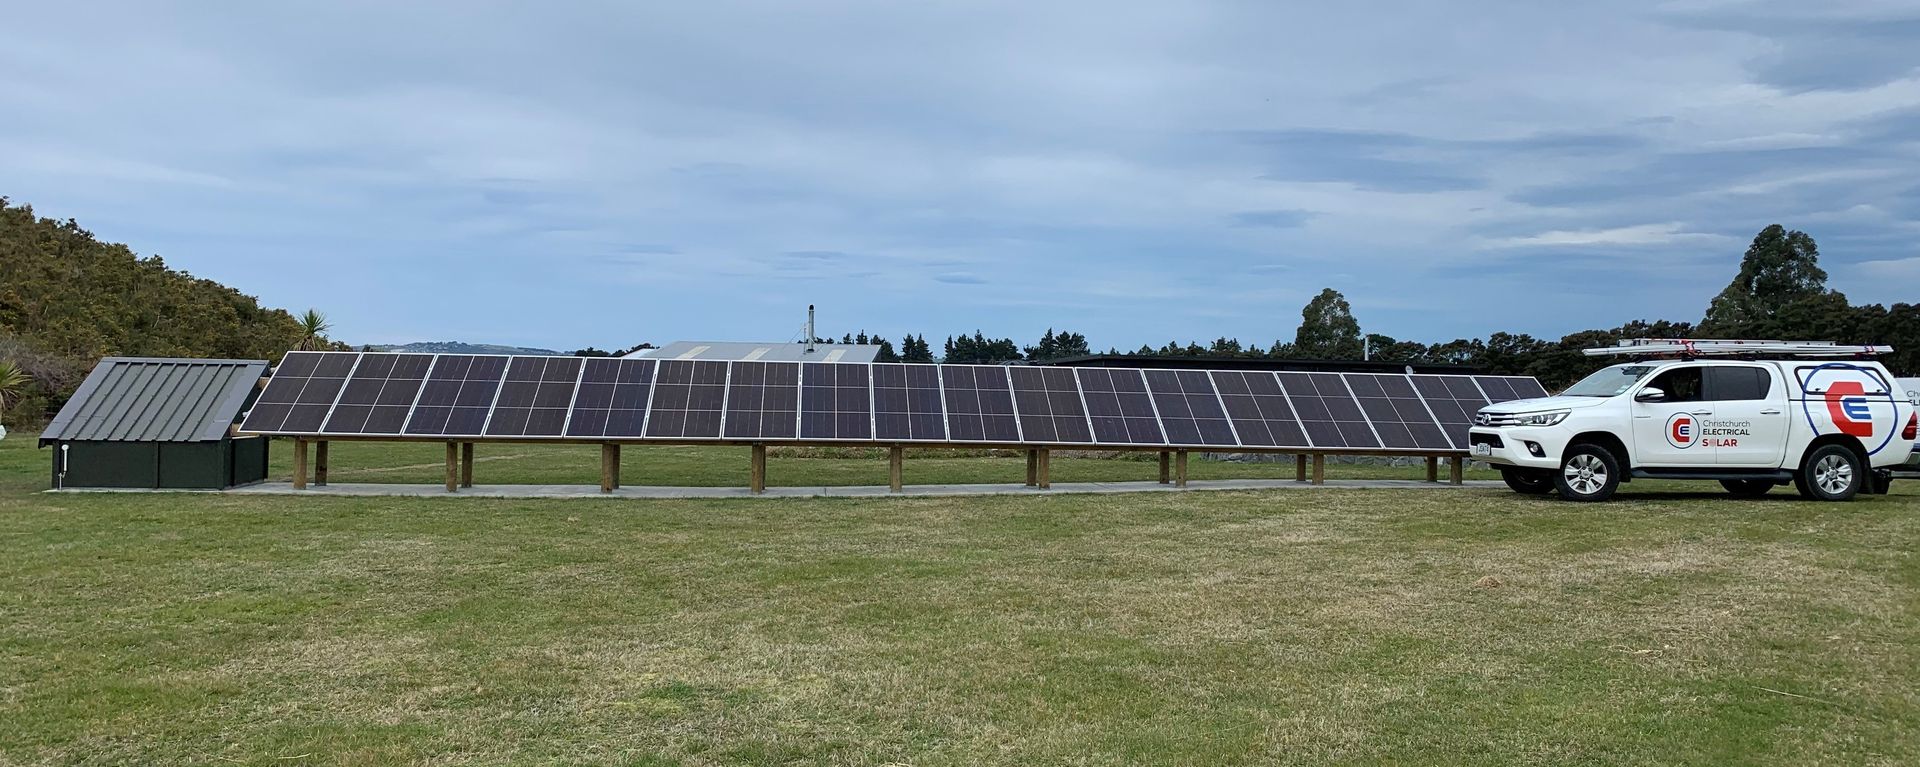 Ground mounted solar panel system with Solar ute